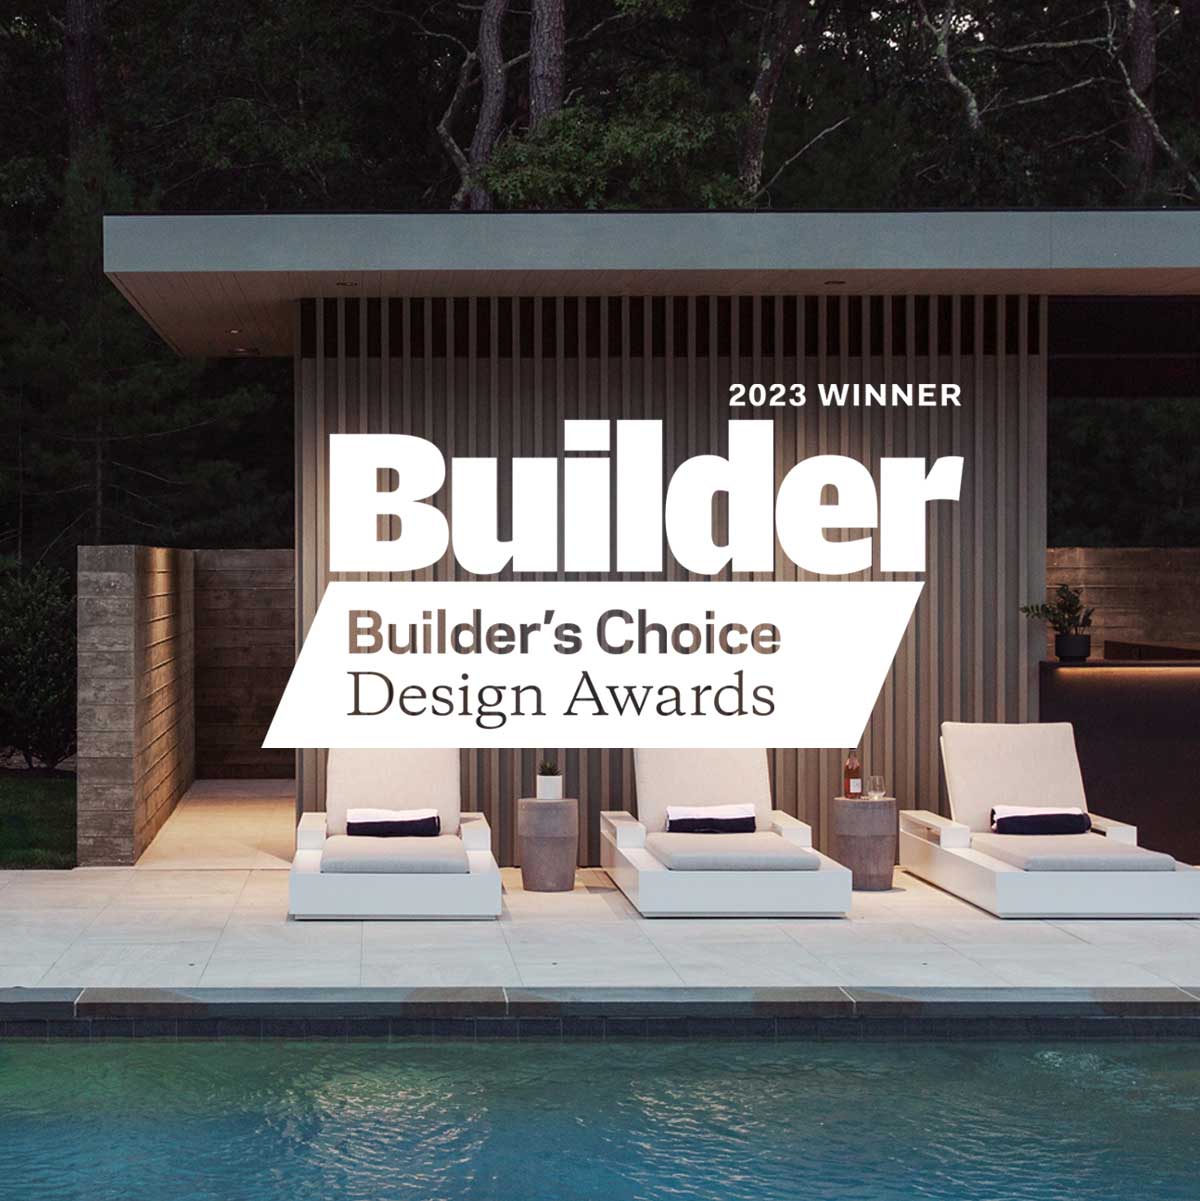 The Up Studio wins a Grand Award at the 2023 Builder's Choice Award for Inside Out Cabana in the category off Accessory Building / Outdoor Space